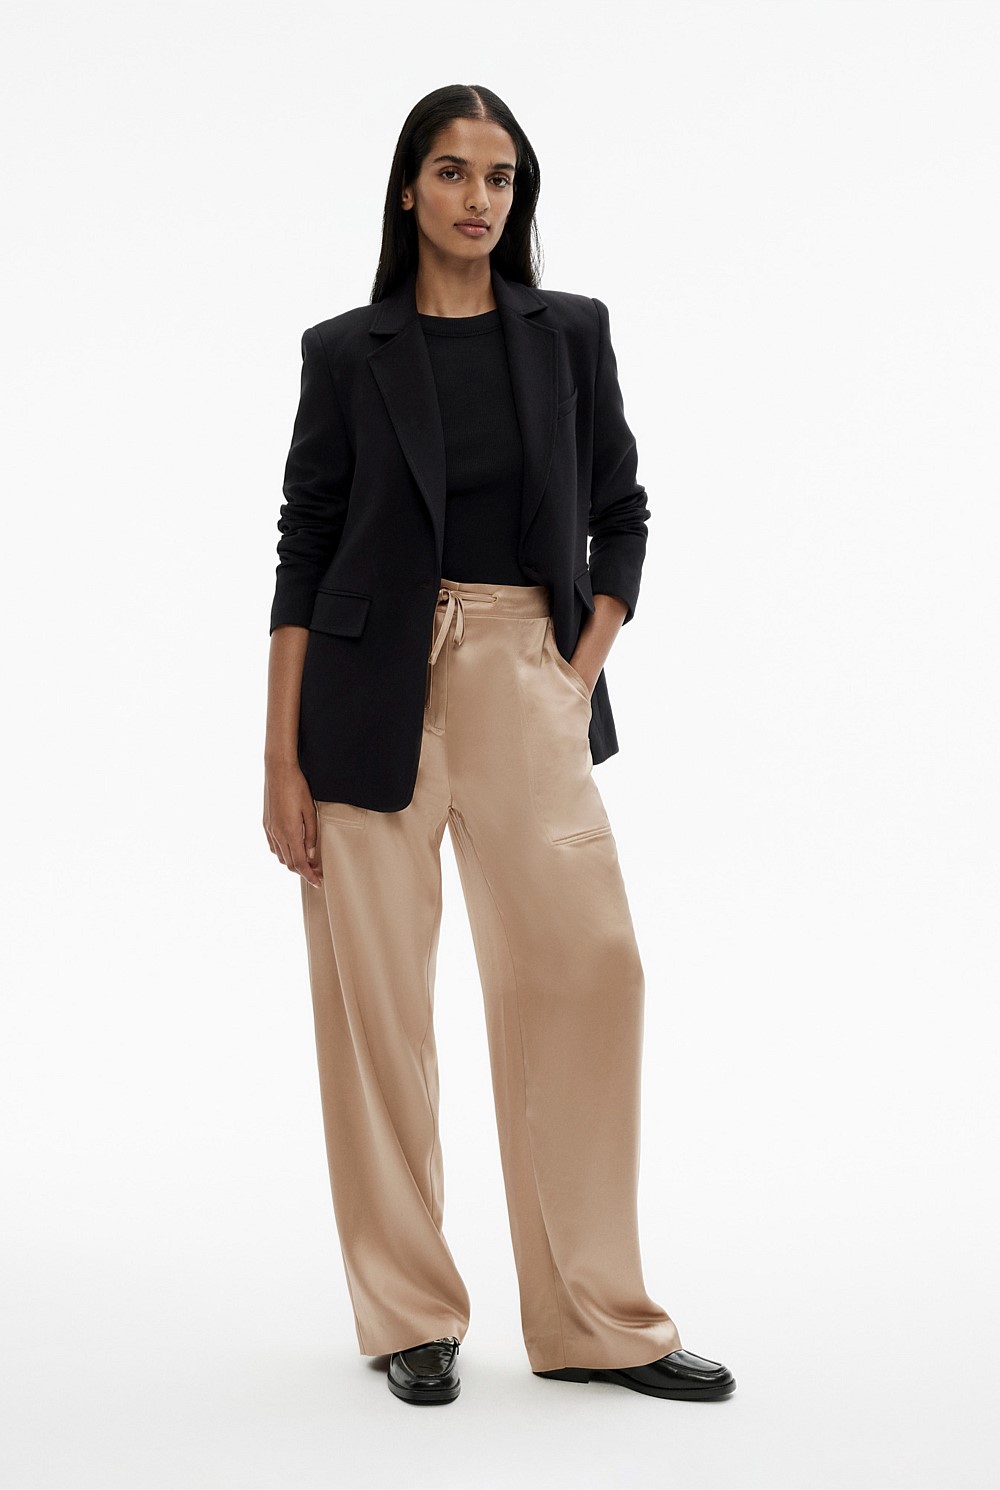 Shop Women's Sale High Waisted Pants & Trousers | Witchery NZ